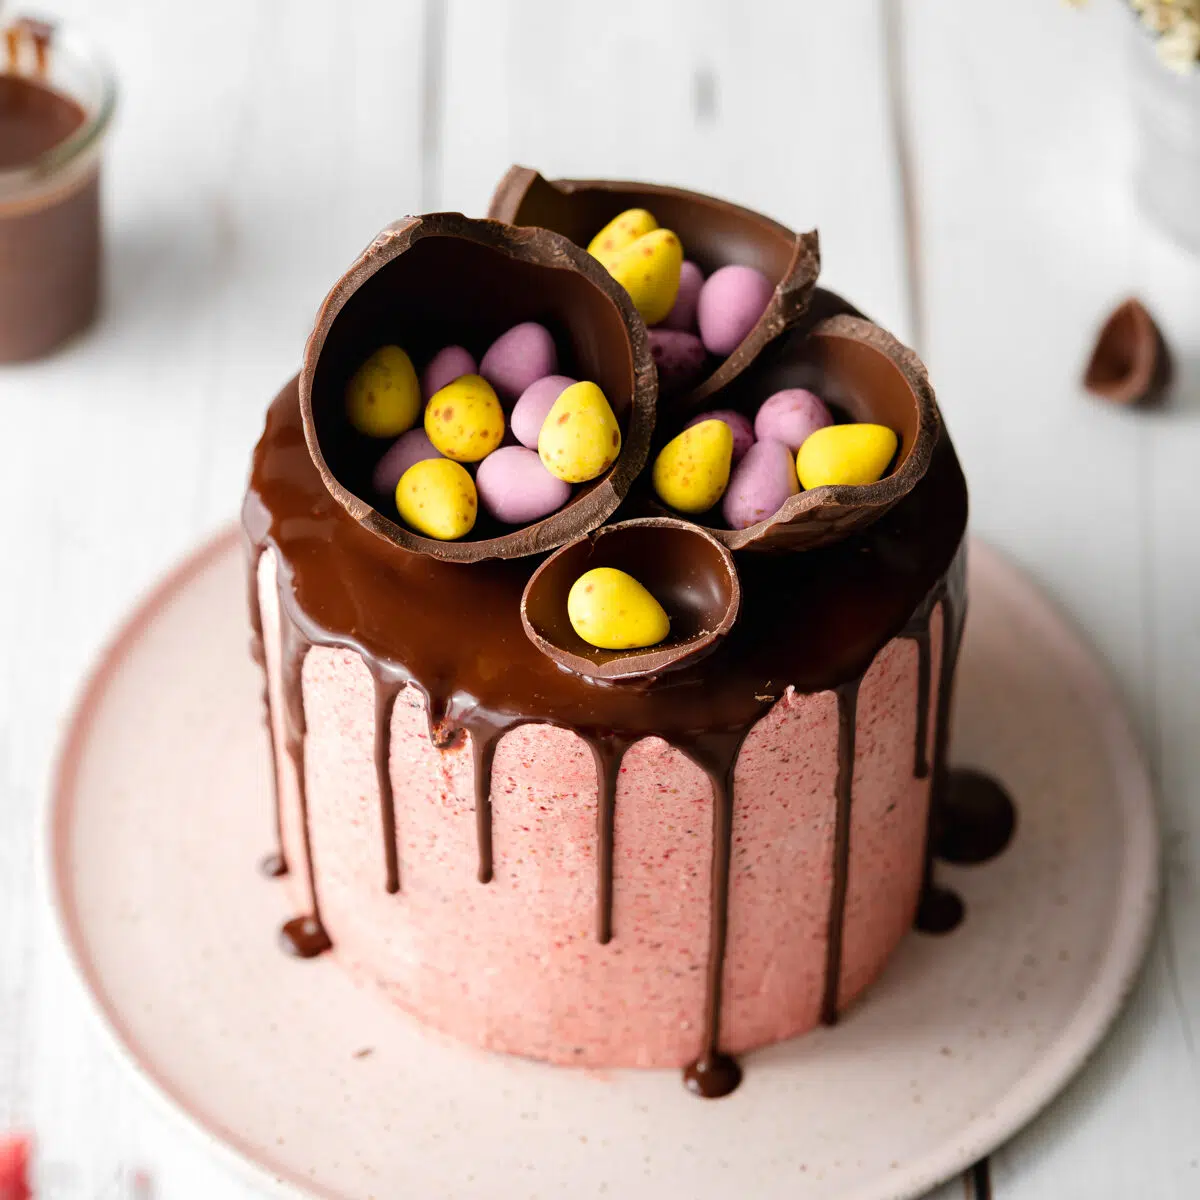 pink layer cake with chocolate drip and easter eggs on top on a ceramic plate.